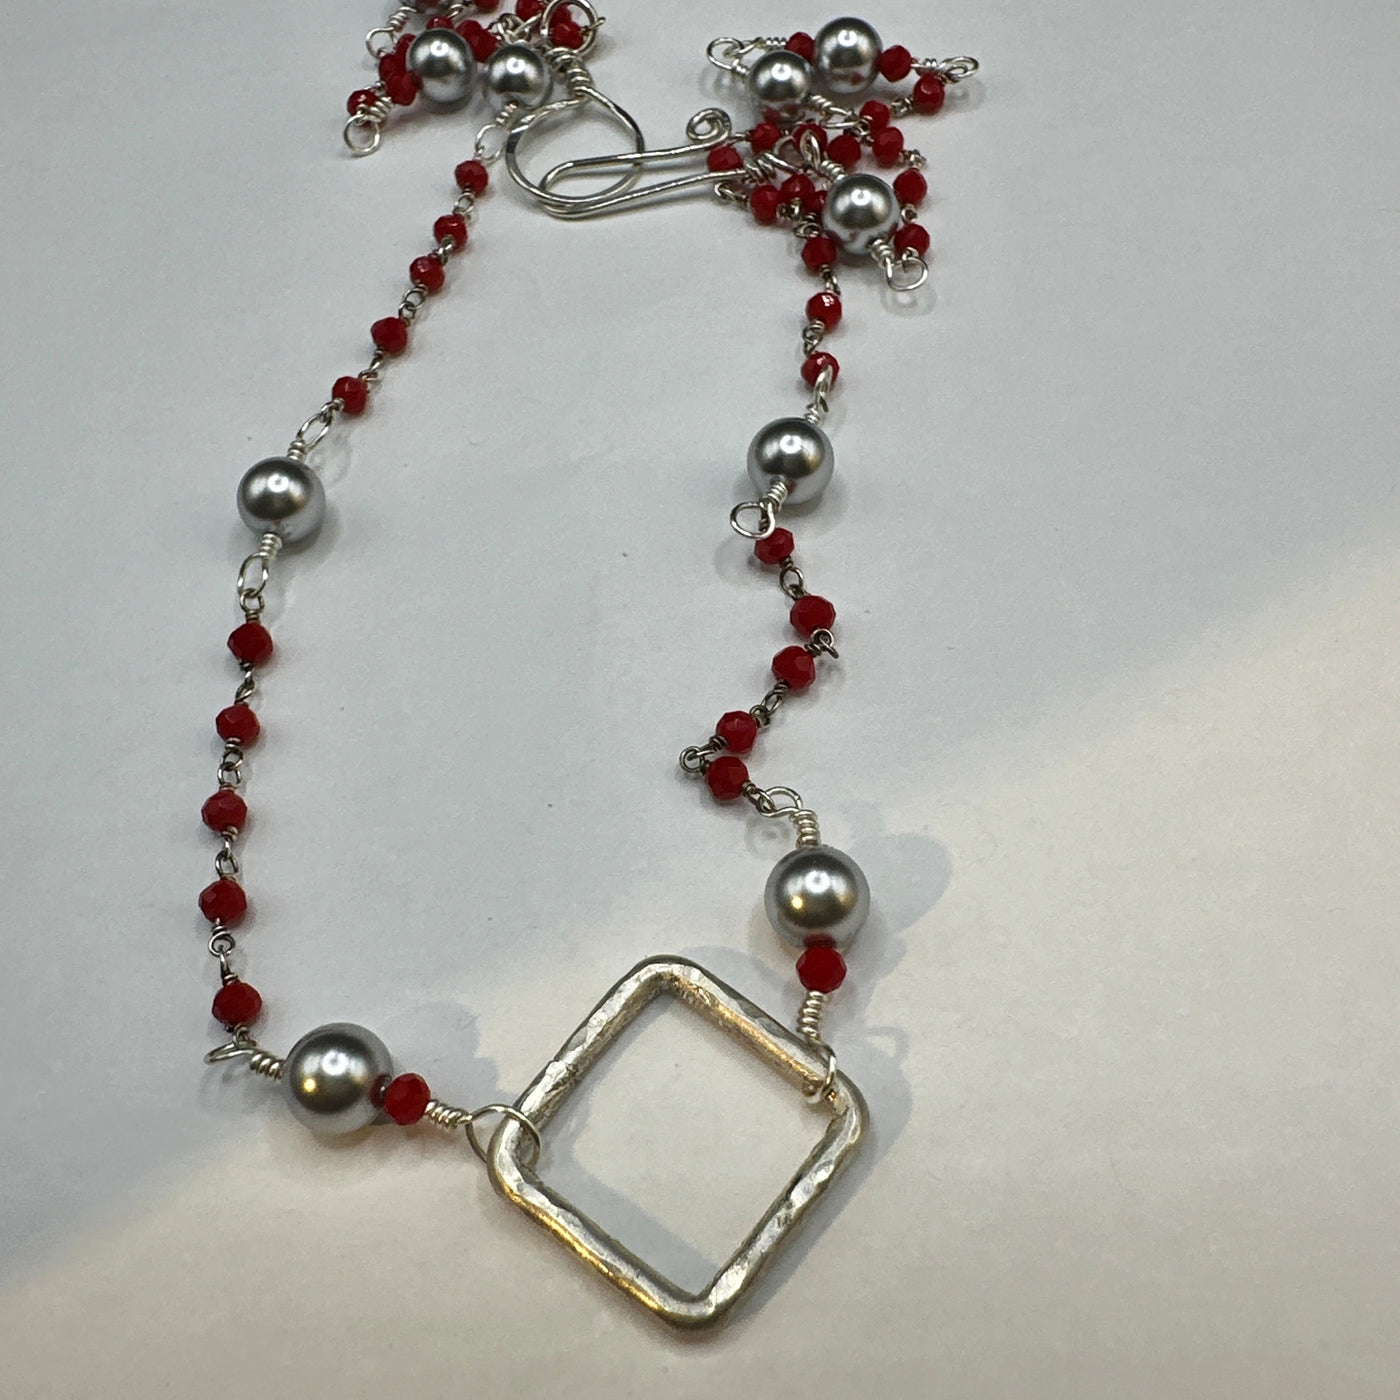 Necklace silver 925 with red beads and light grey pearls and a square silver insert as a centrepiece